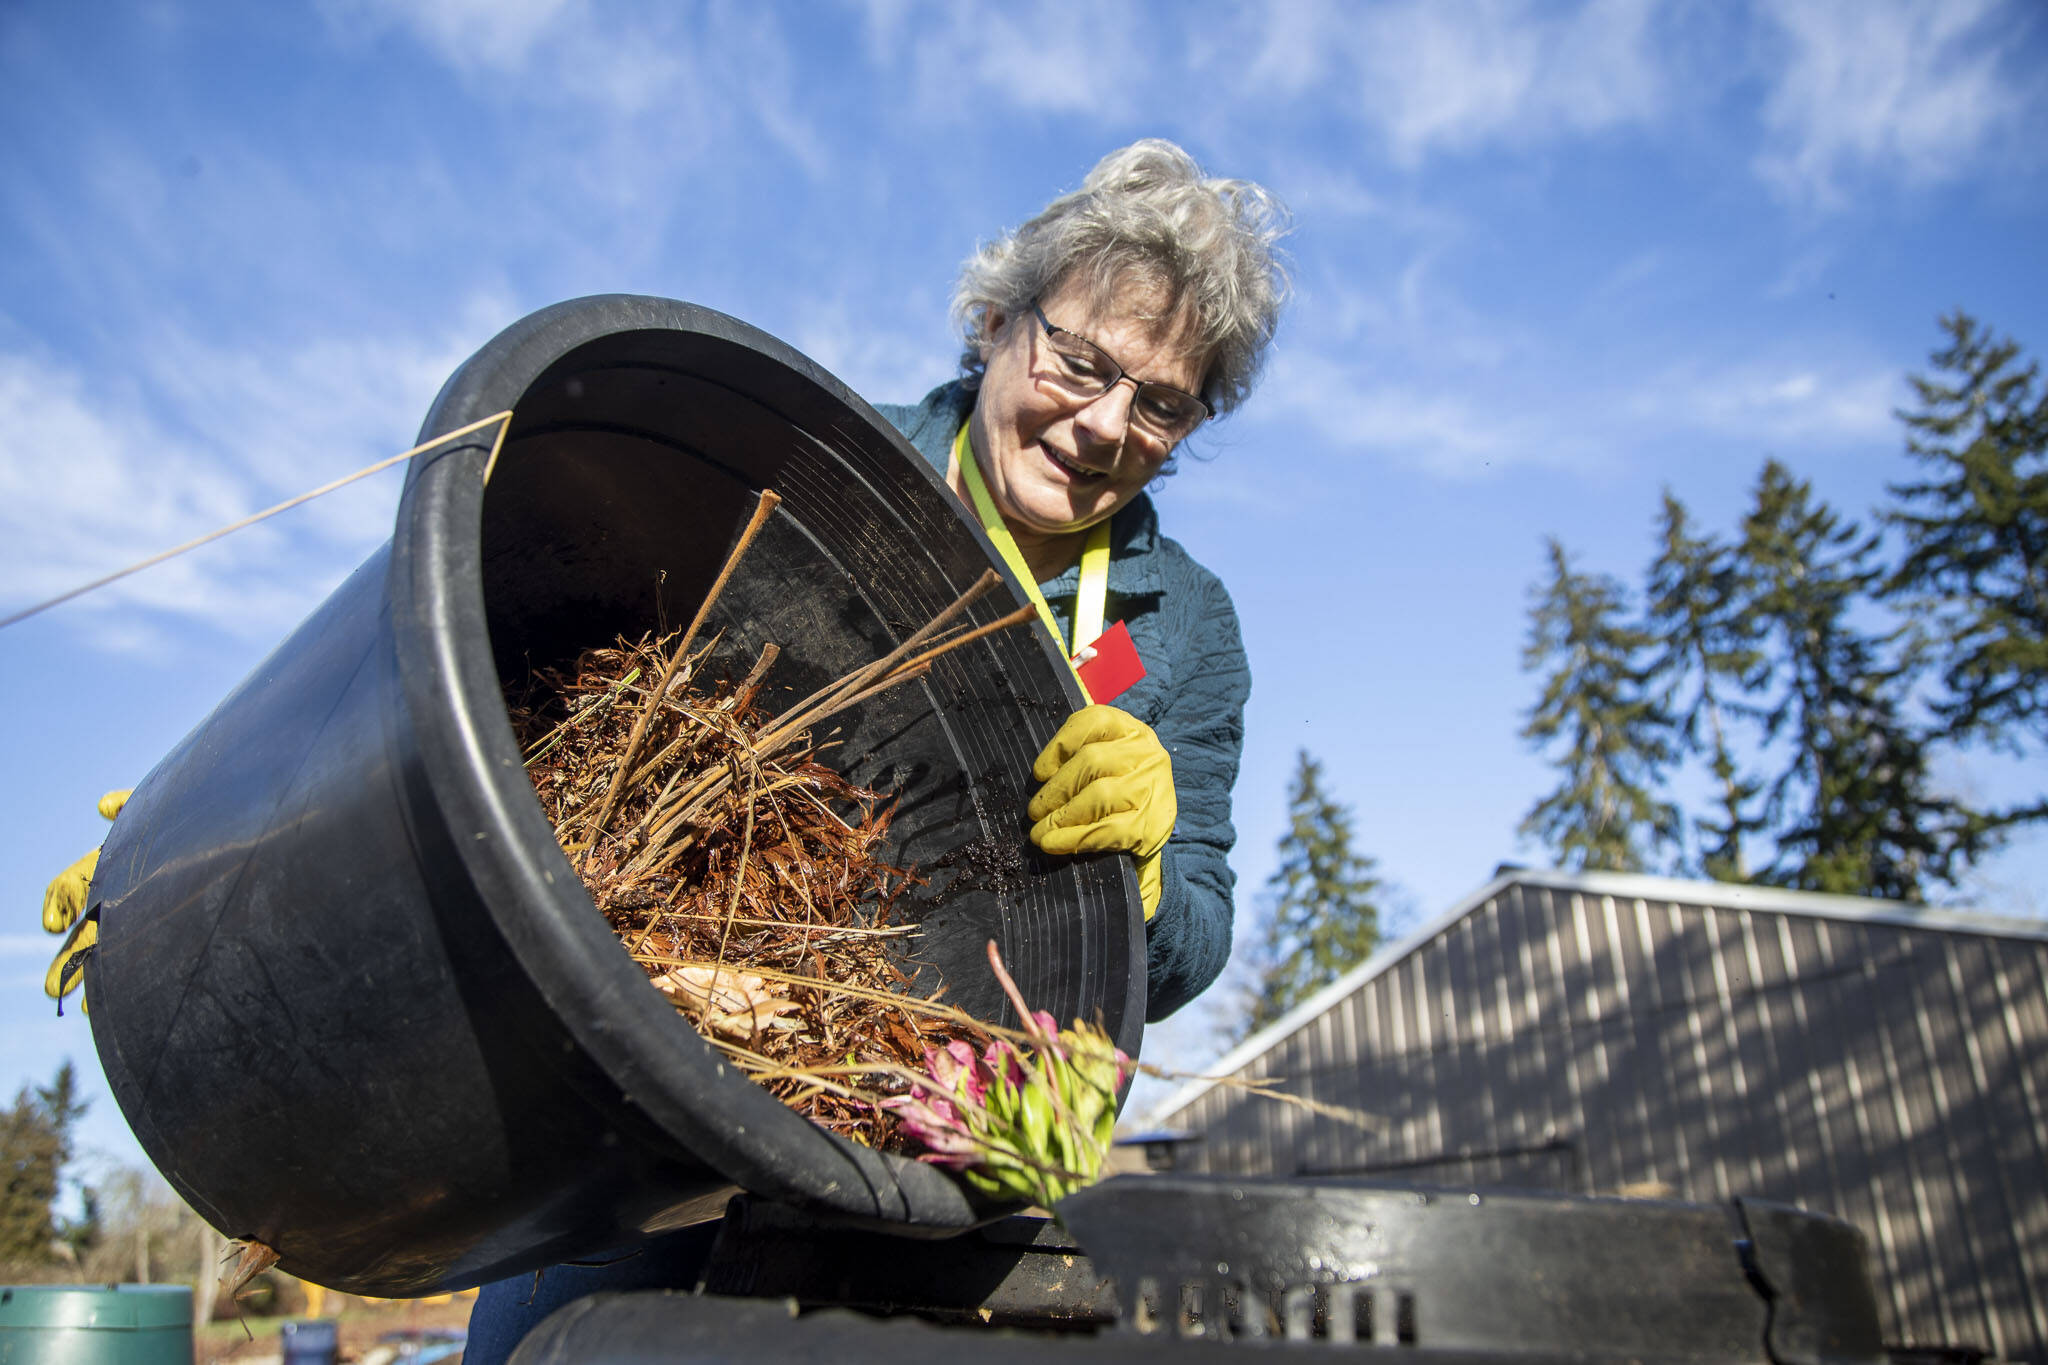 Master Gardener Jackie Trimble, 68, dumps yard waste into her compost bin in the backyard of her home in Lake Stevens on Wednesday, January 11. (Annie Barker / The Herald)